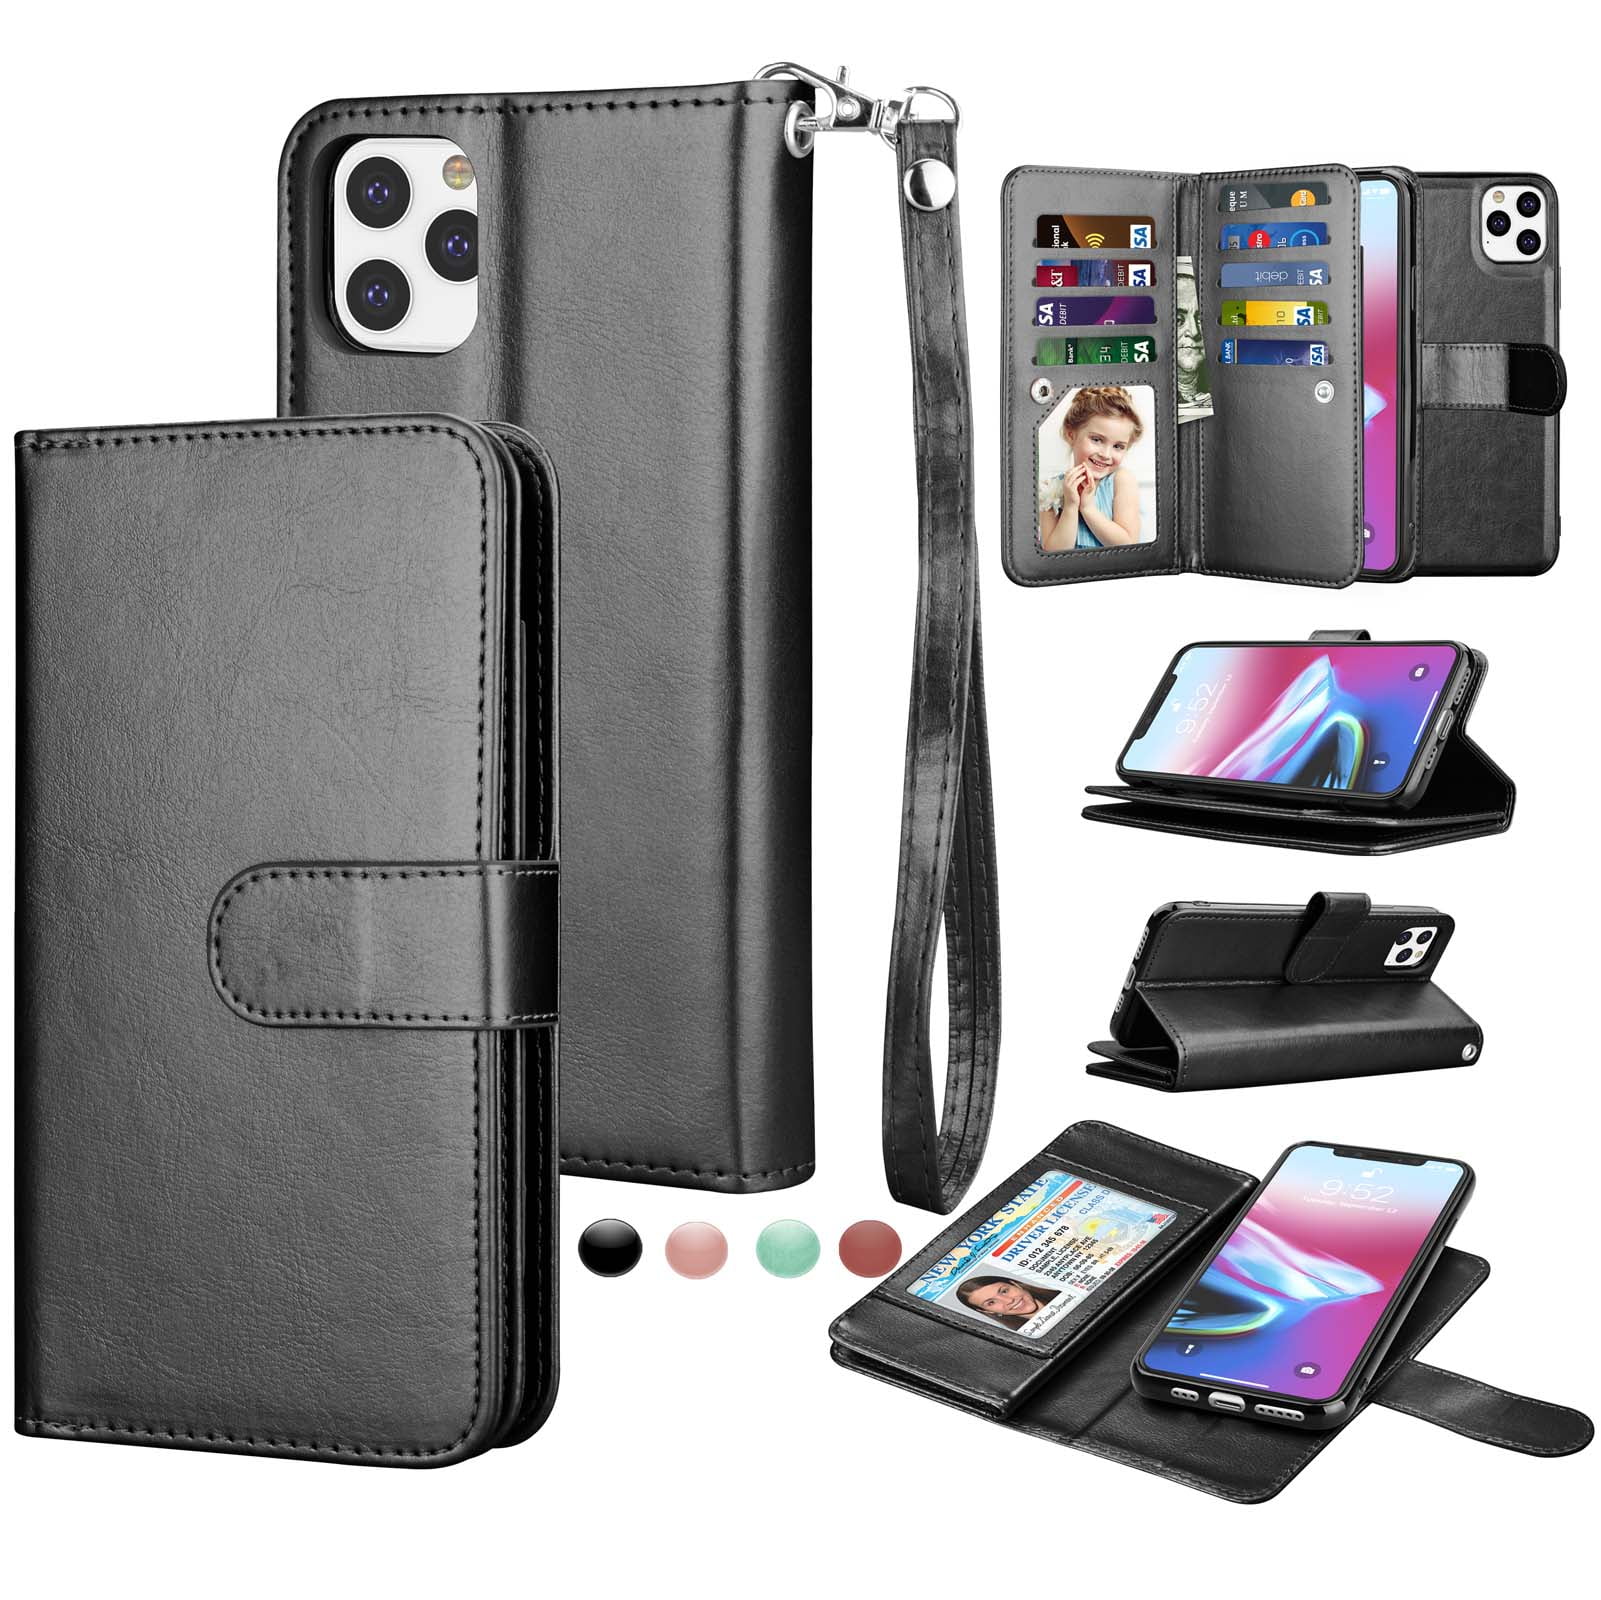 iPhone 11 Wallet Case 2019 -Black LAMEEKU iPhone 11 Card Holder Case with Credit Card Slot Holder Money Pocket Leather Case Protective Phone Case with TPU Bumper Cover for Apple iPhone 11 6.1 